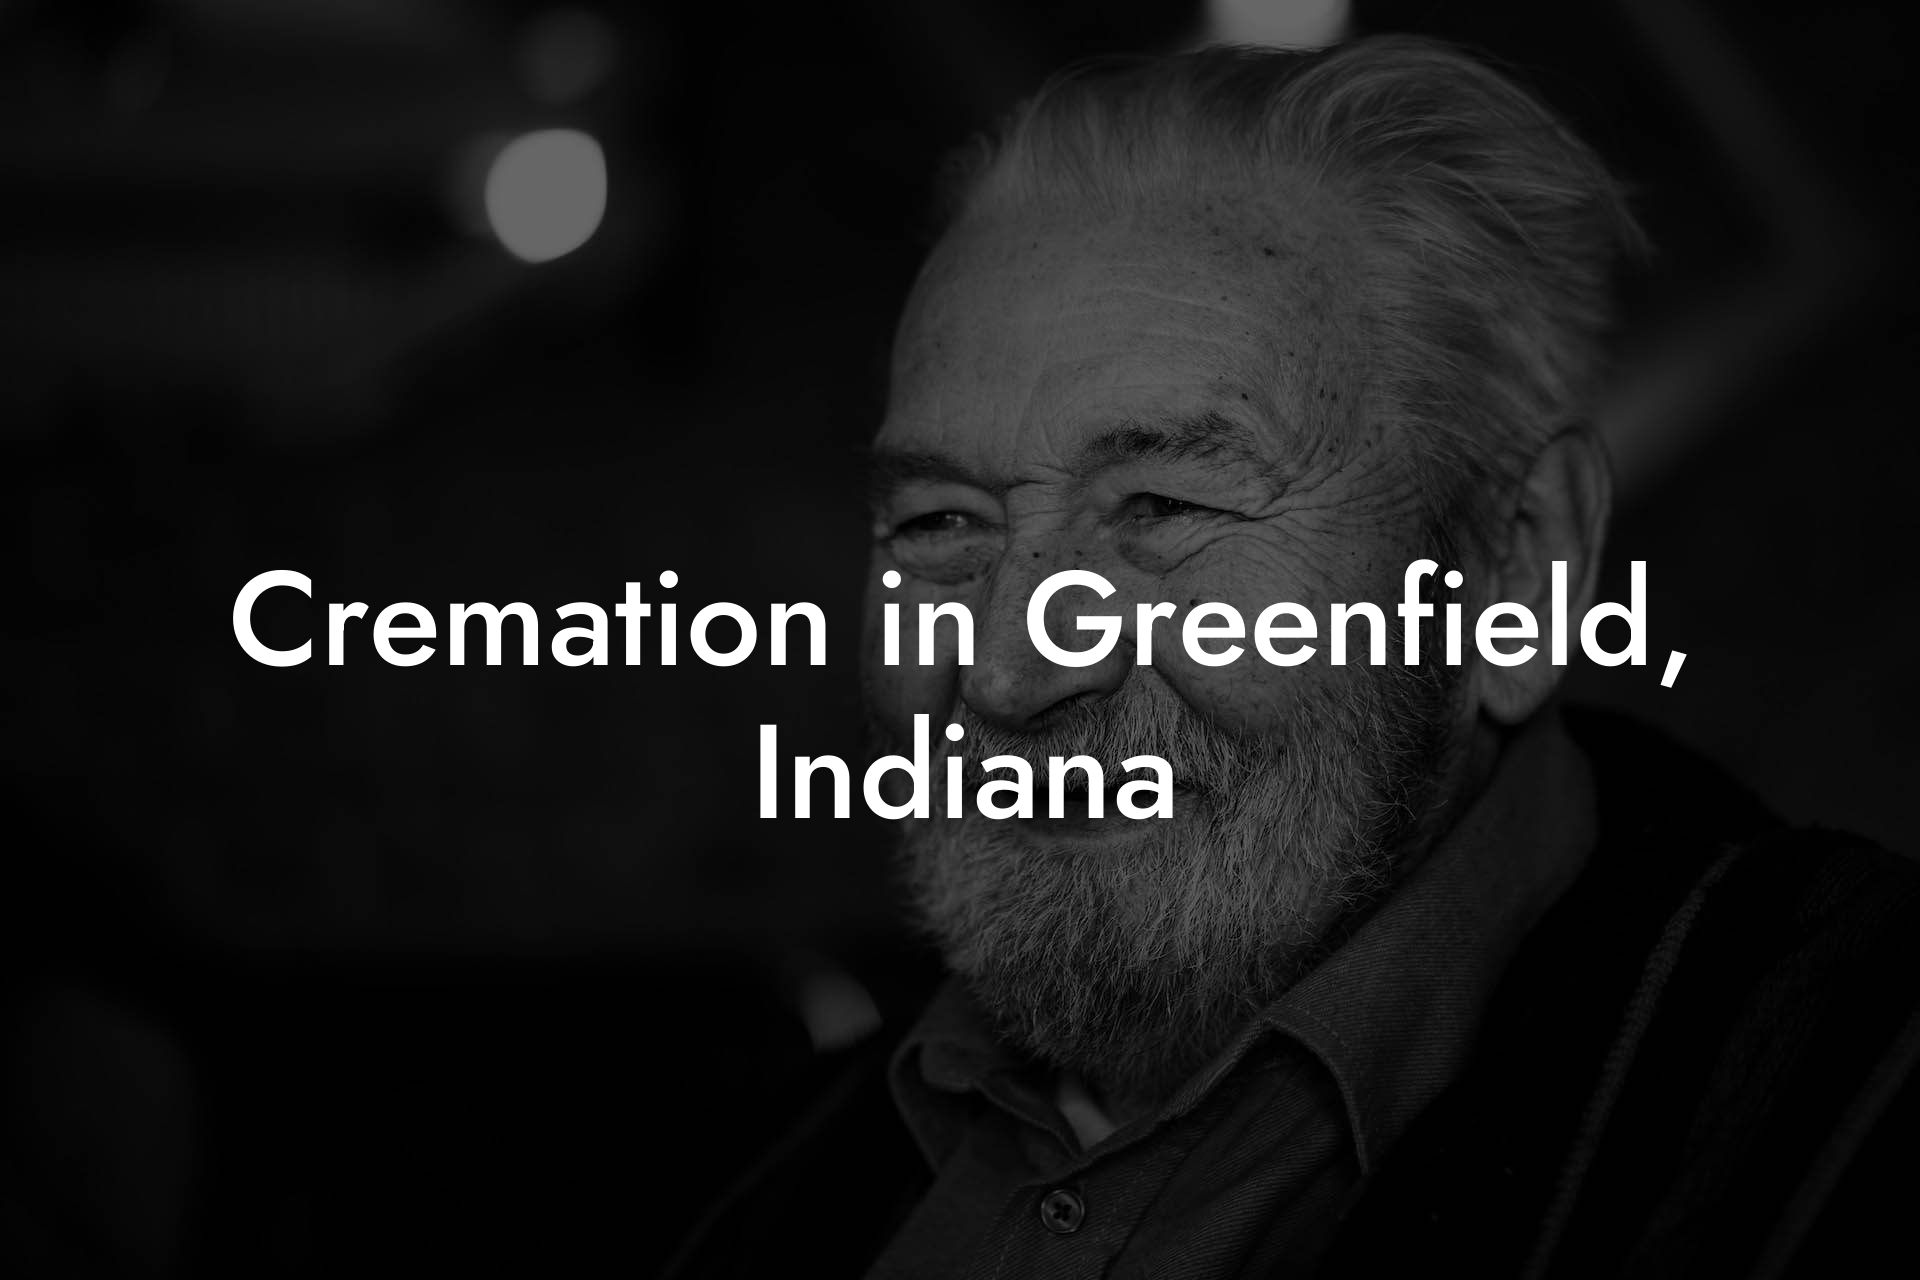 Cremation in Greenfield, Indiana